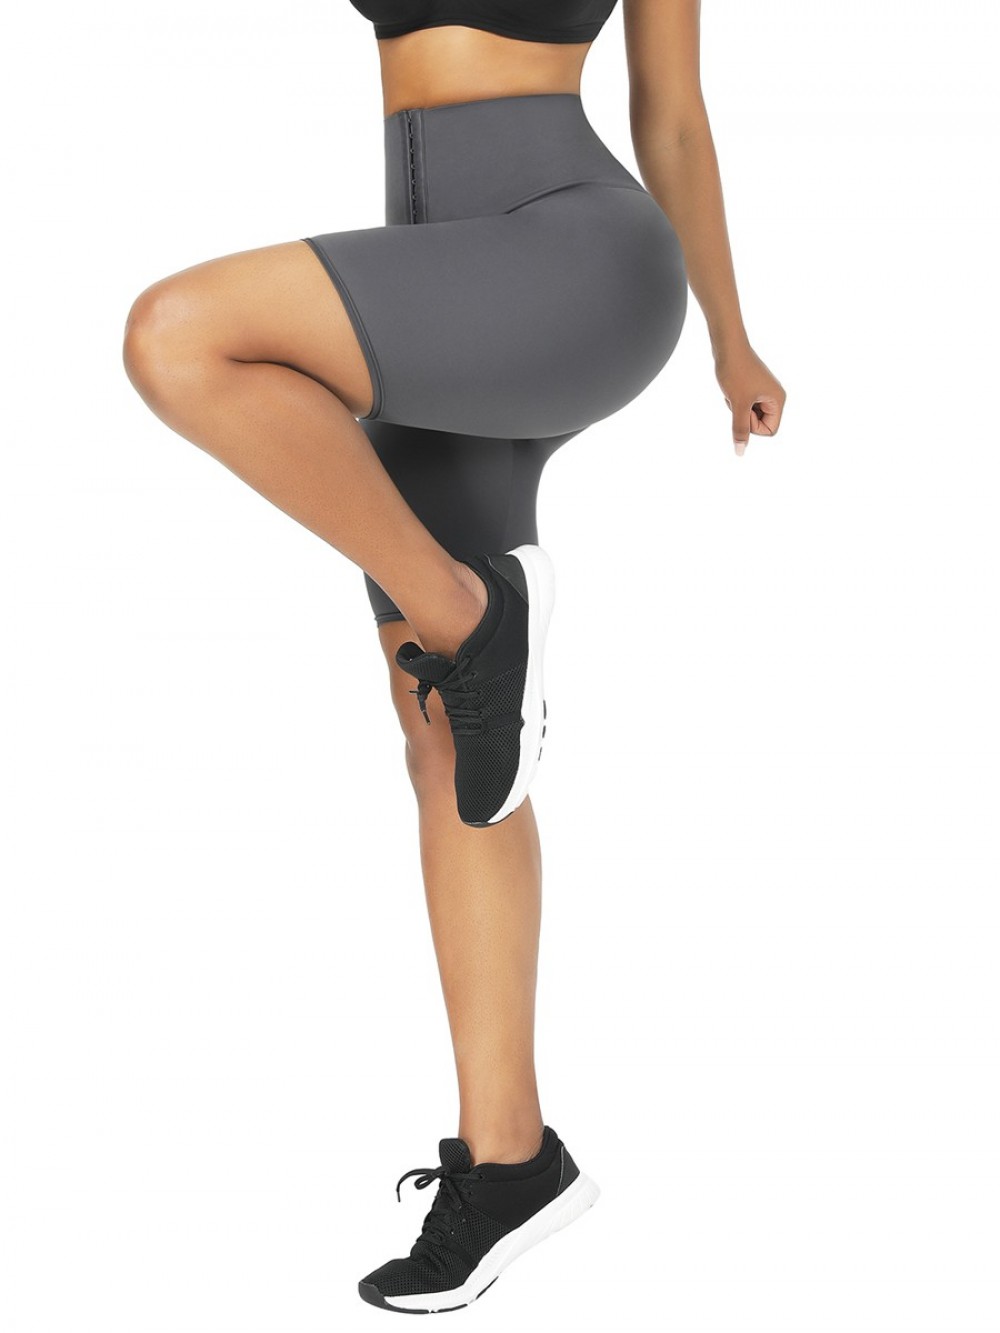 Gray 2-In-1 Tummy Control Waist Trainer Shorts Mid-Thigh Compression